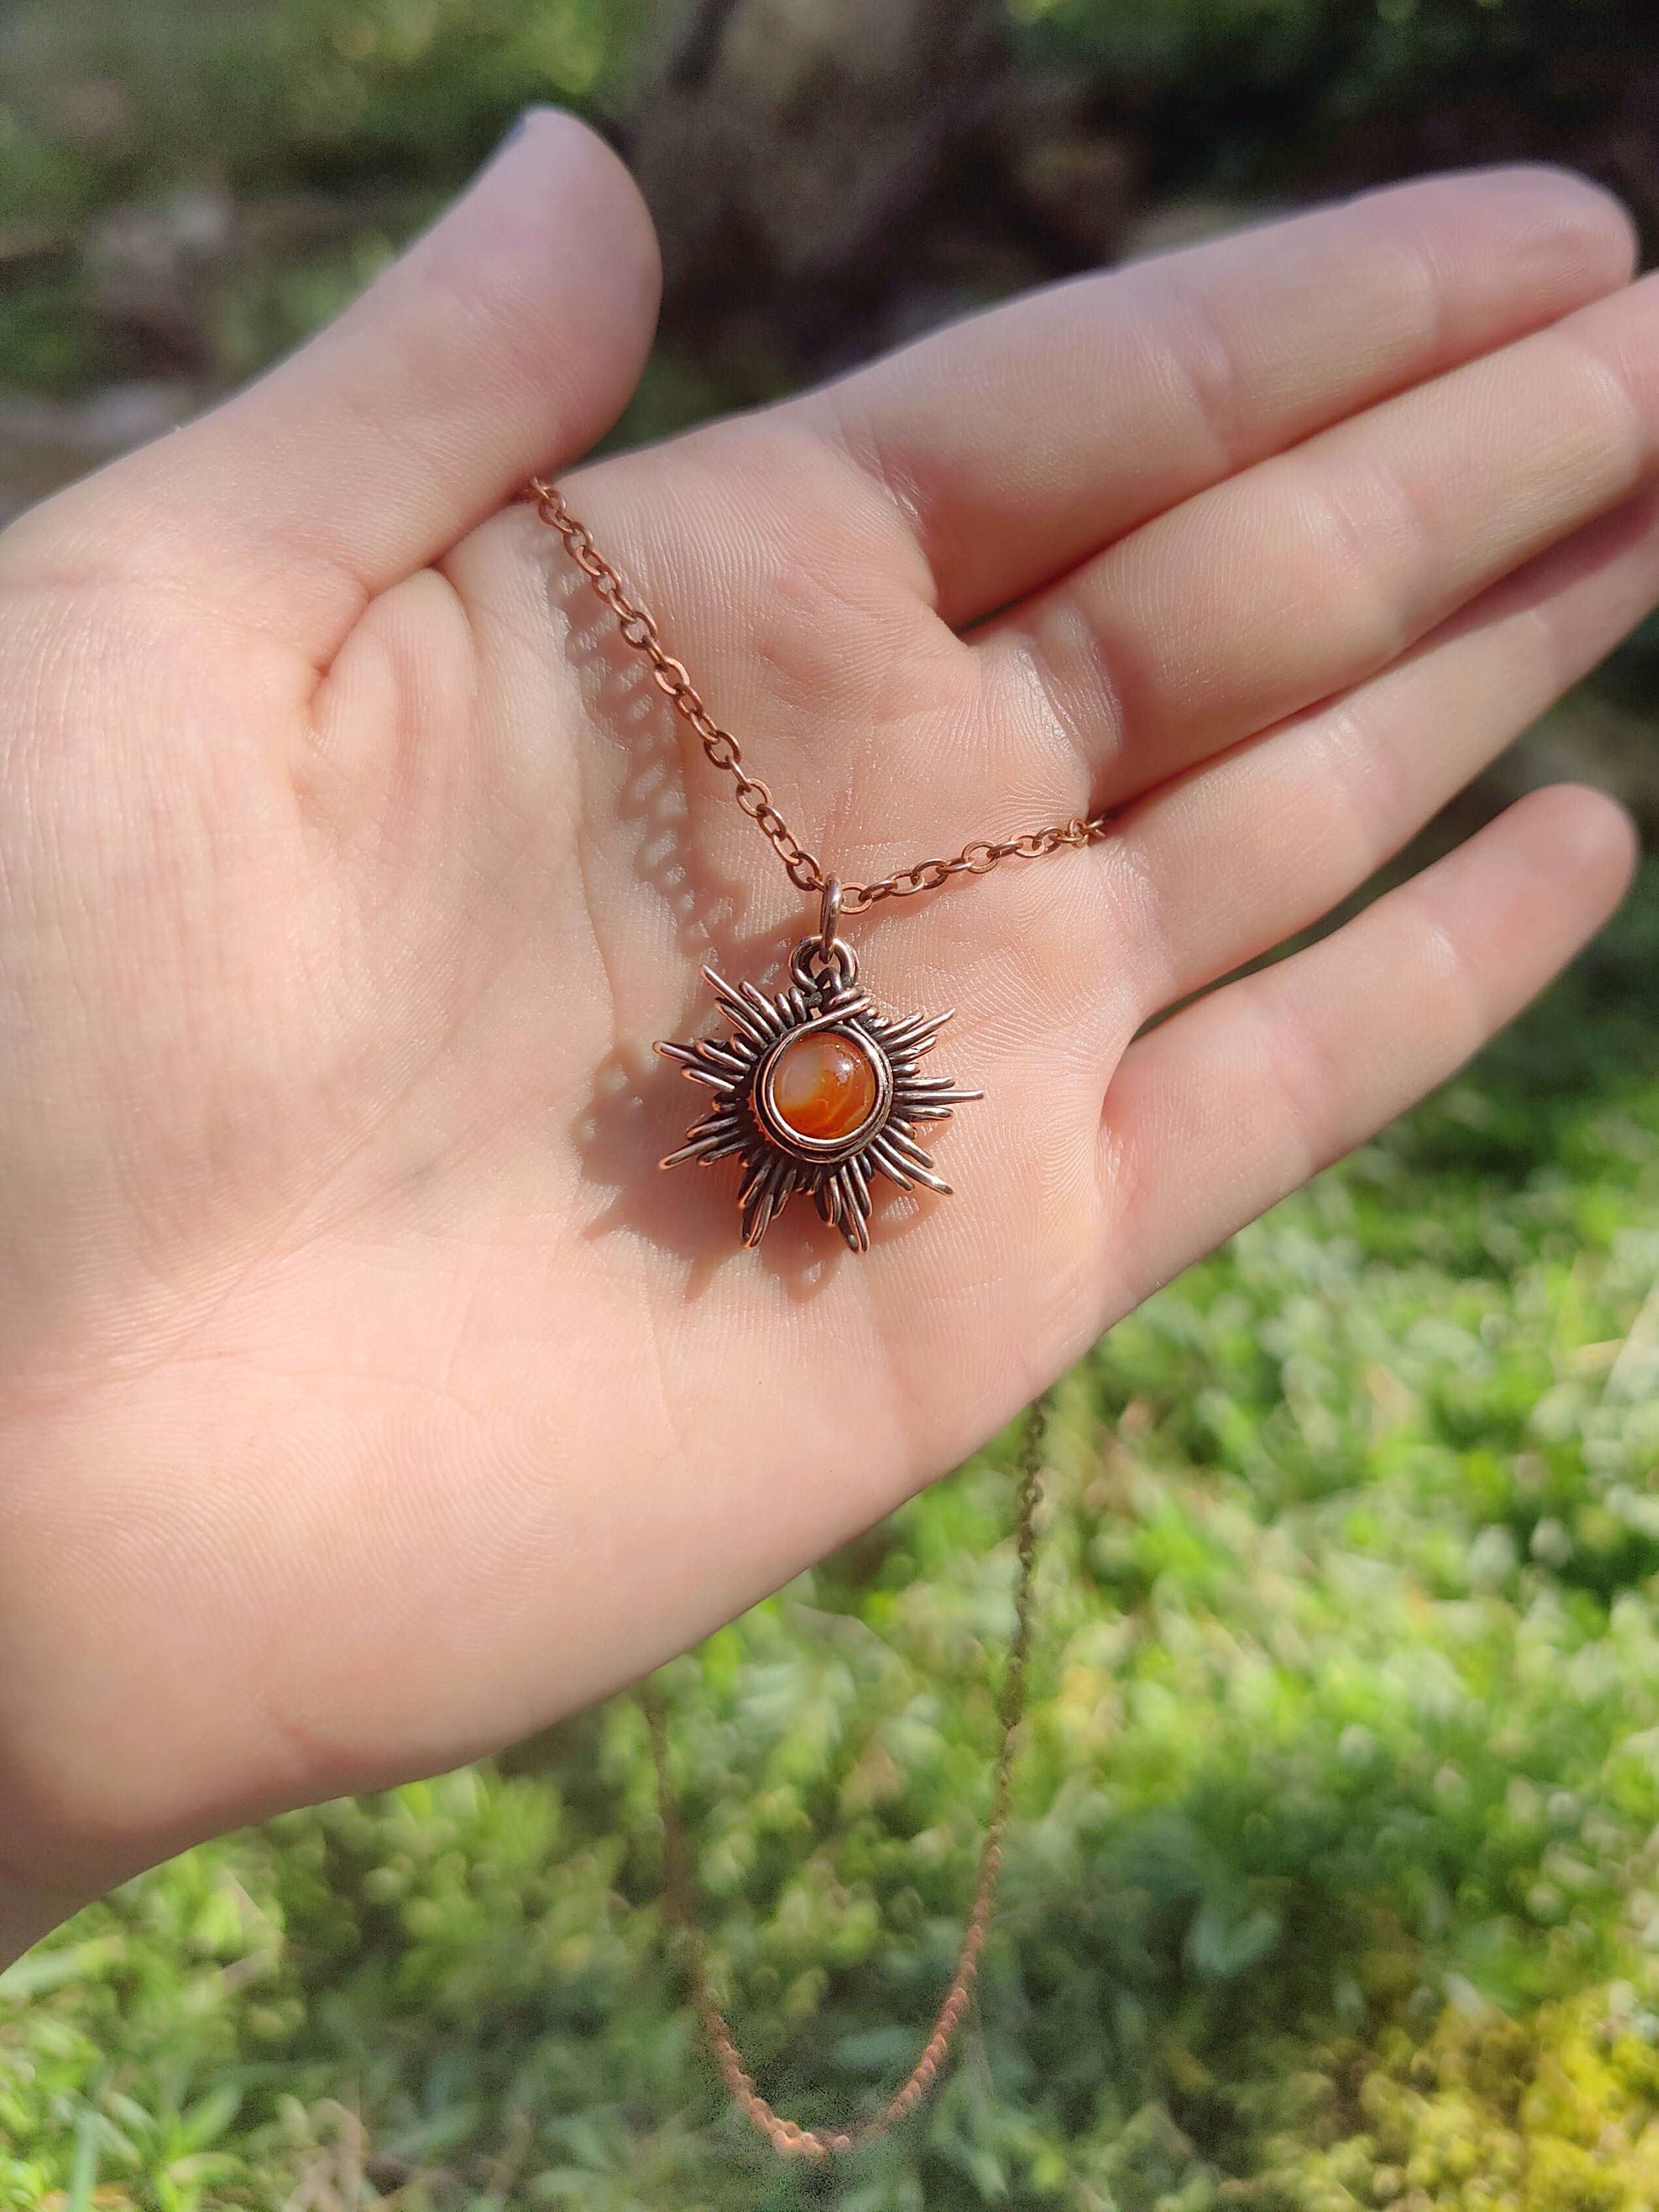 Handmade red crystal sun pendant, made with carnelian stone and antique copper wire. Beautiful summery pendant, for any nature lover, boho hippie.